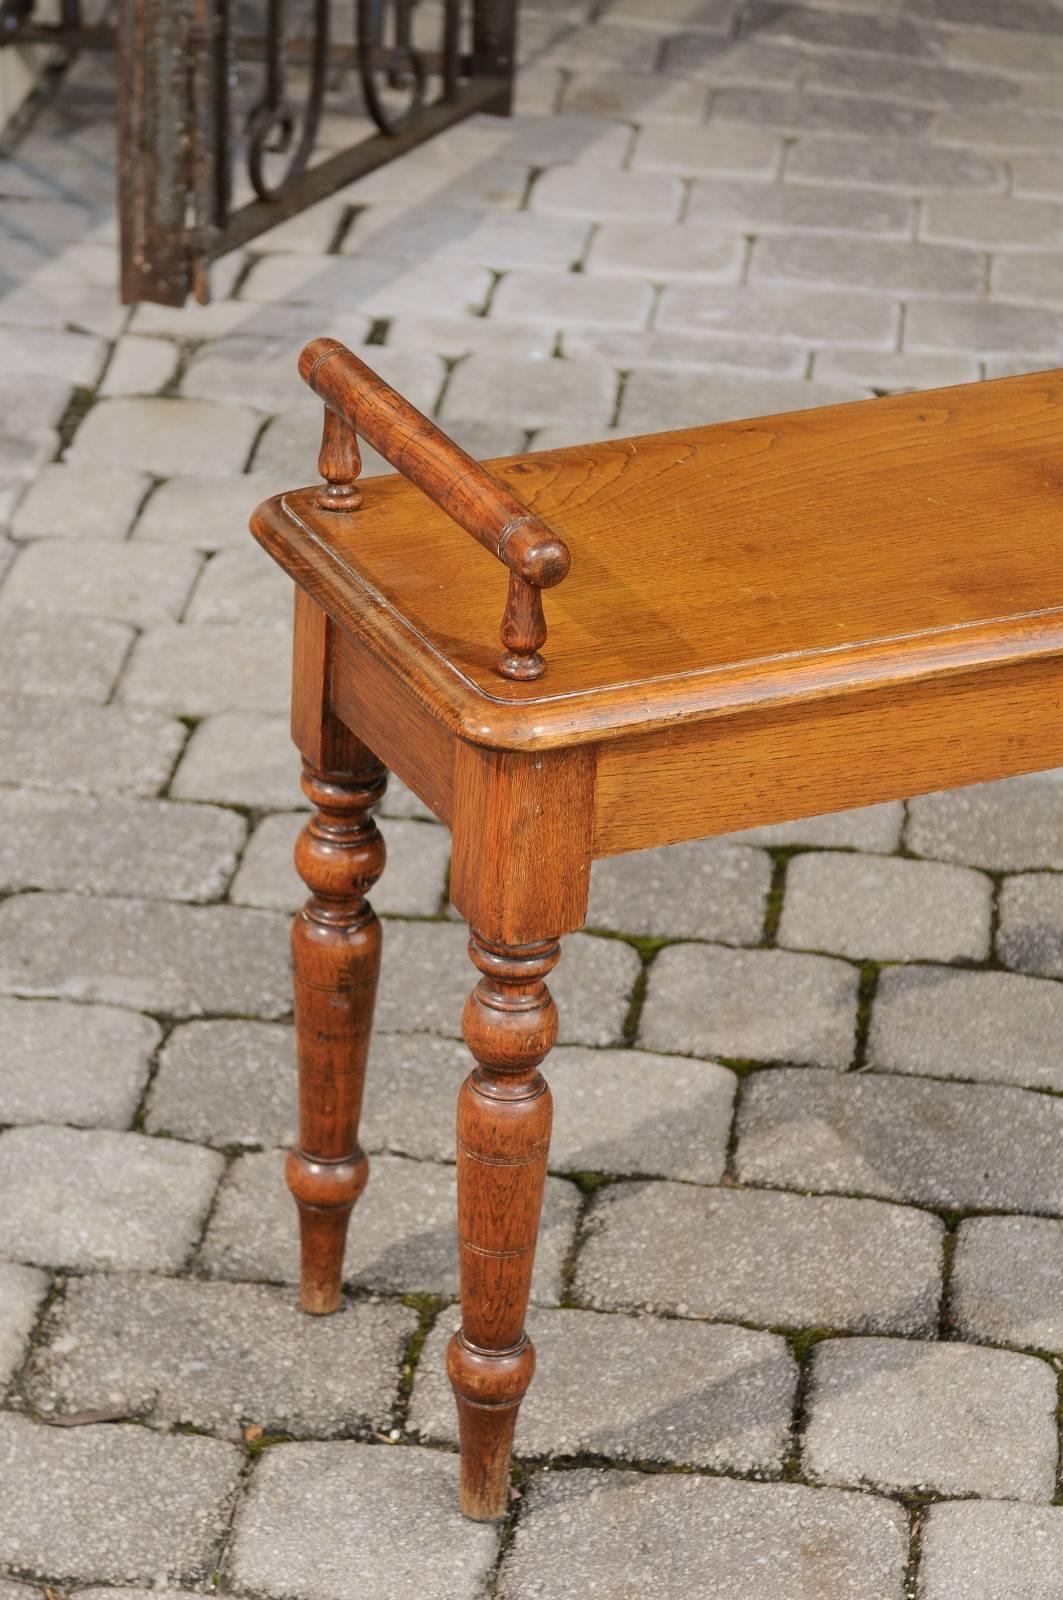 20th Century English 1900s Oak Hall Bench with Cylindrical Arm Supports and Turned Legs